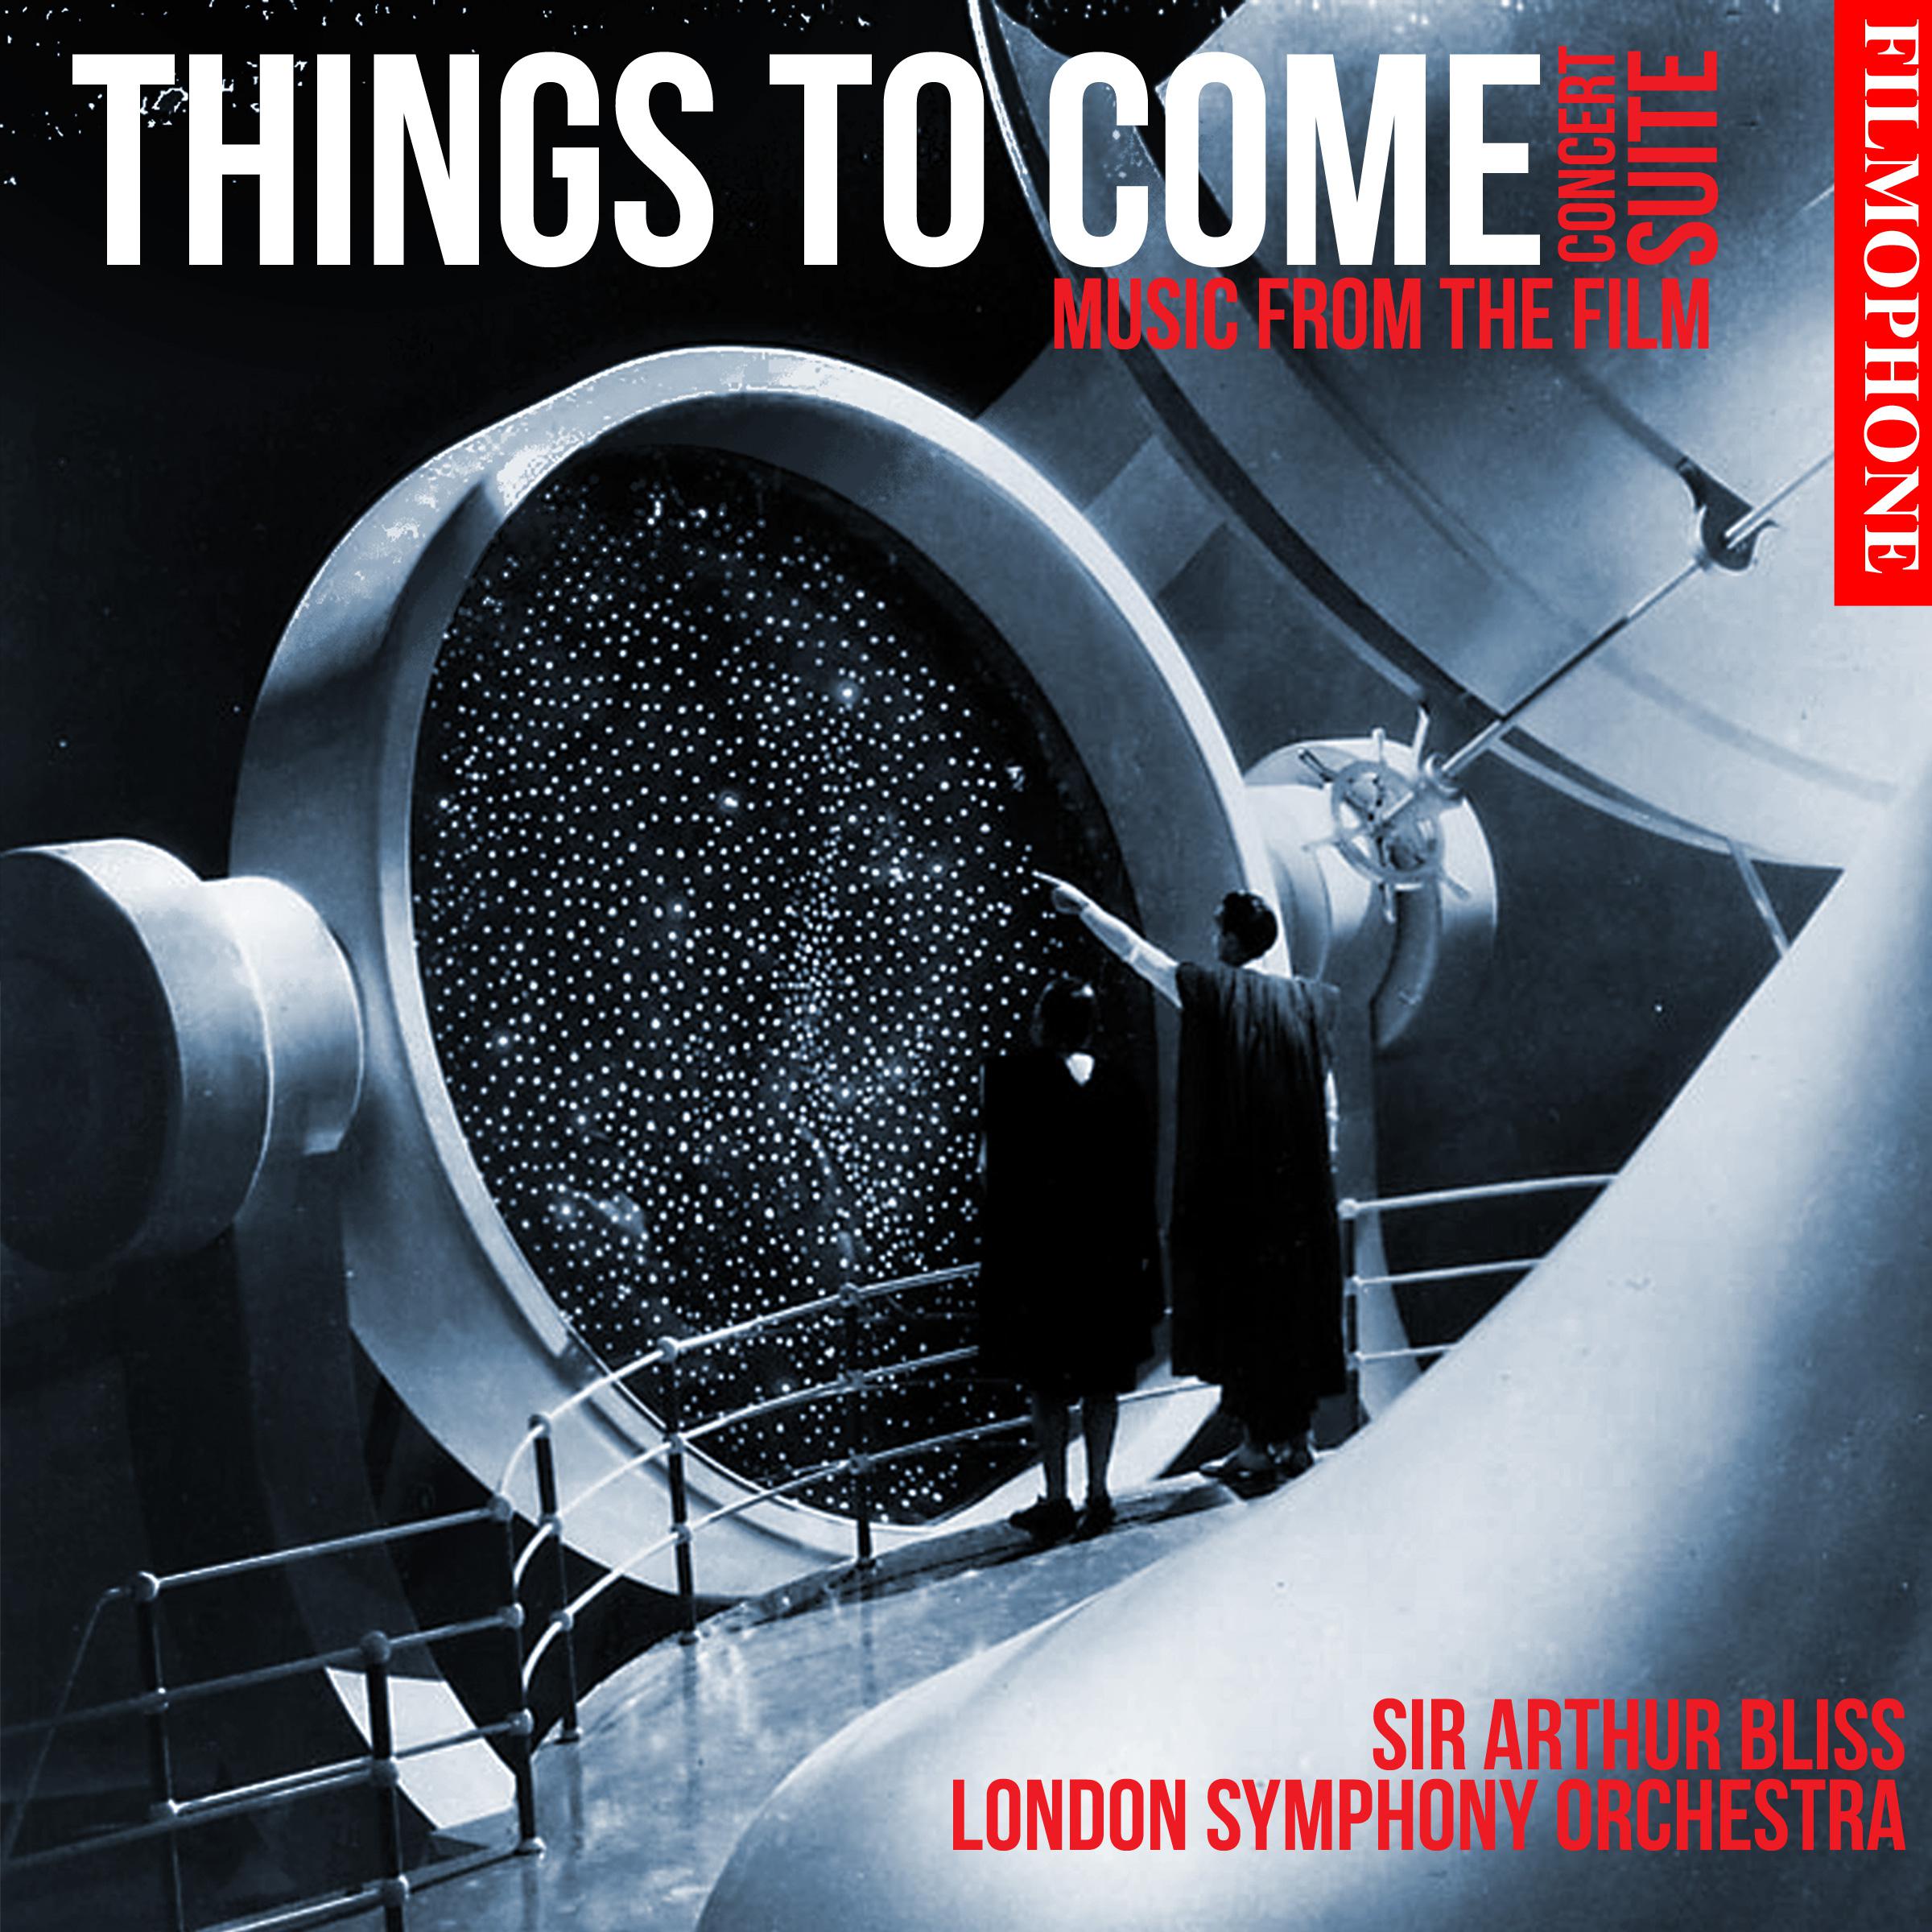 Things To Come (Concert Suite: Music from the Film)